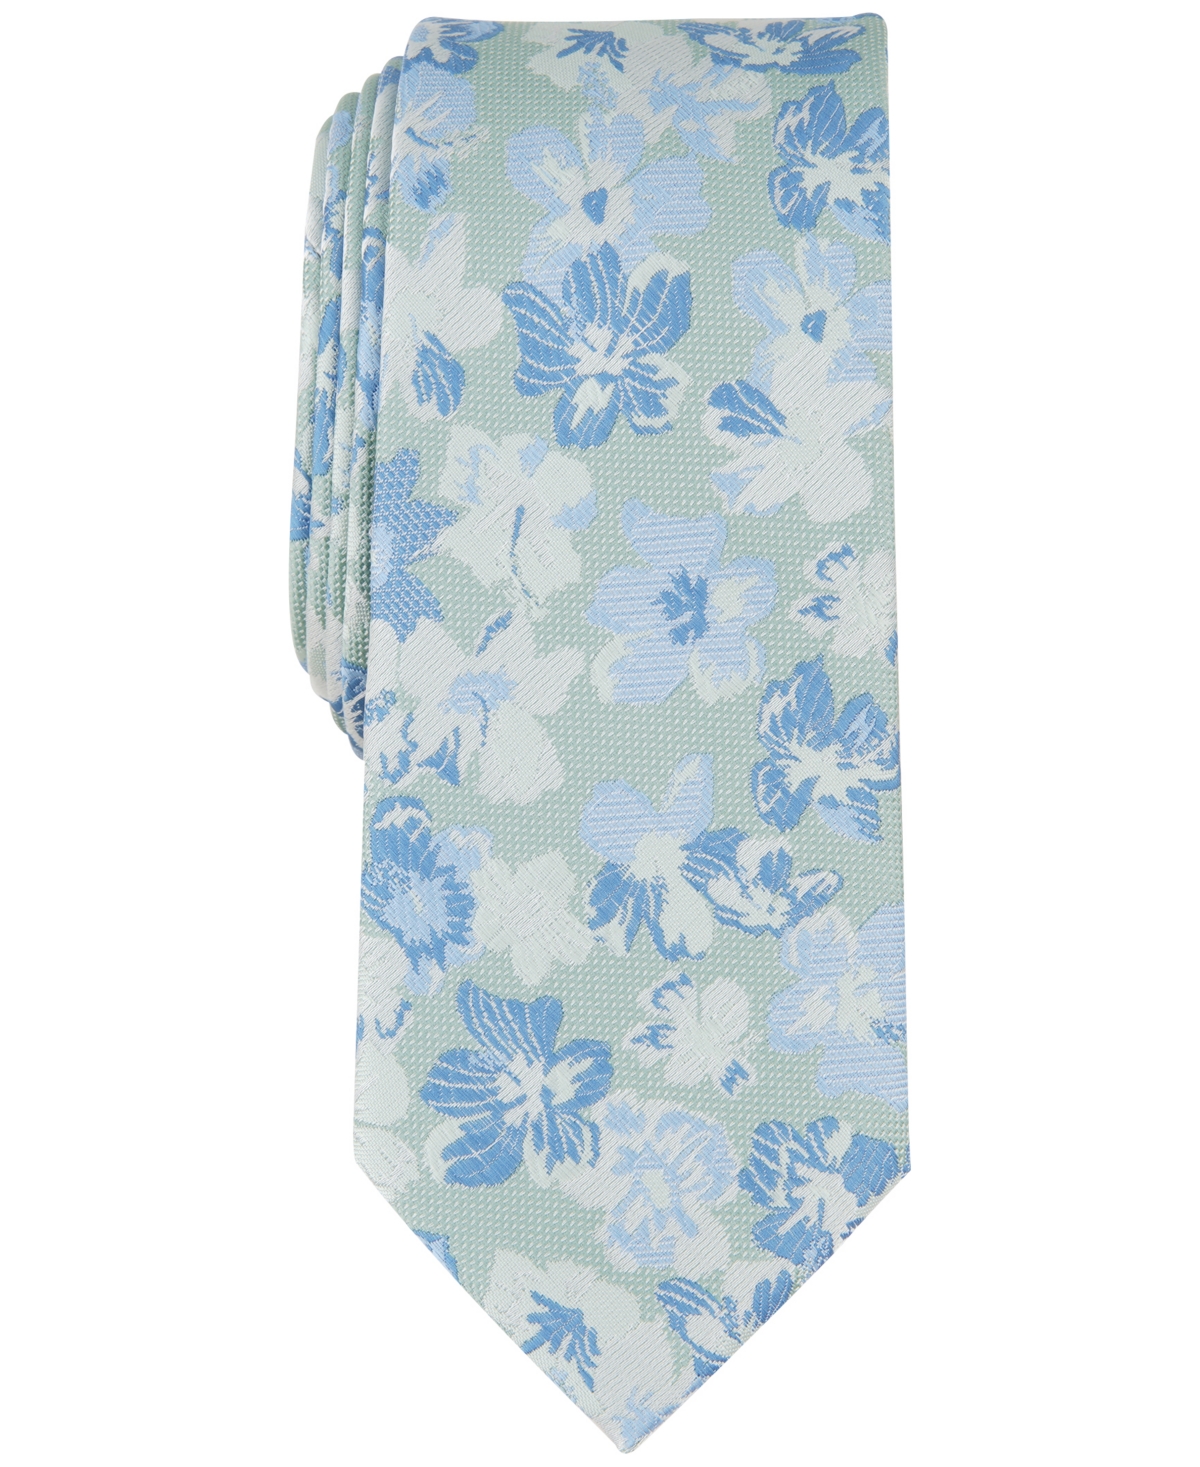 Men's Rhodes Floral Tie, Created for Macy's - Blue